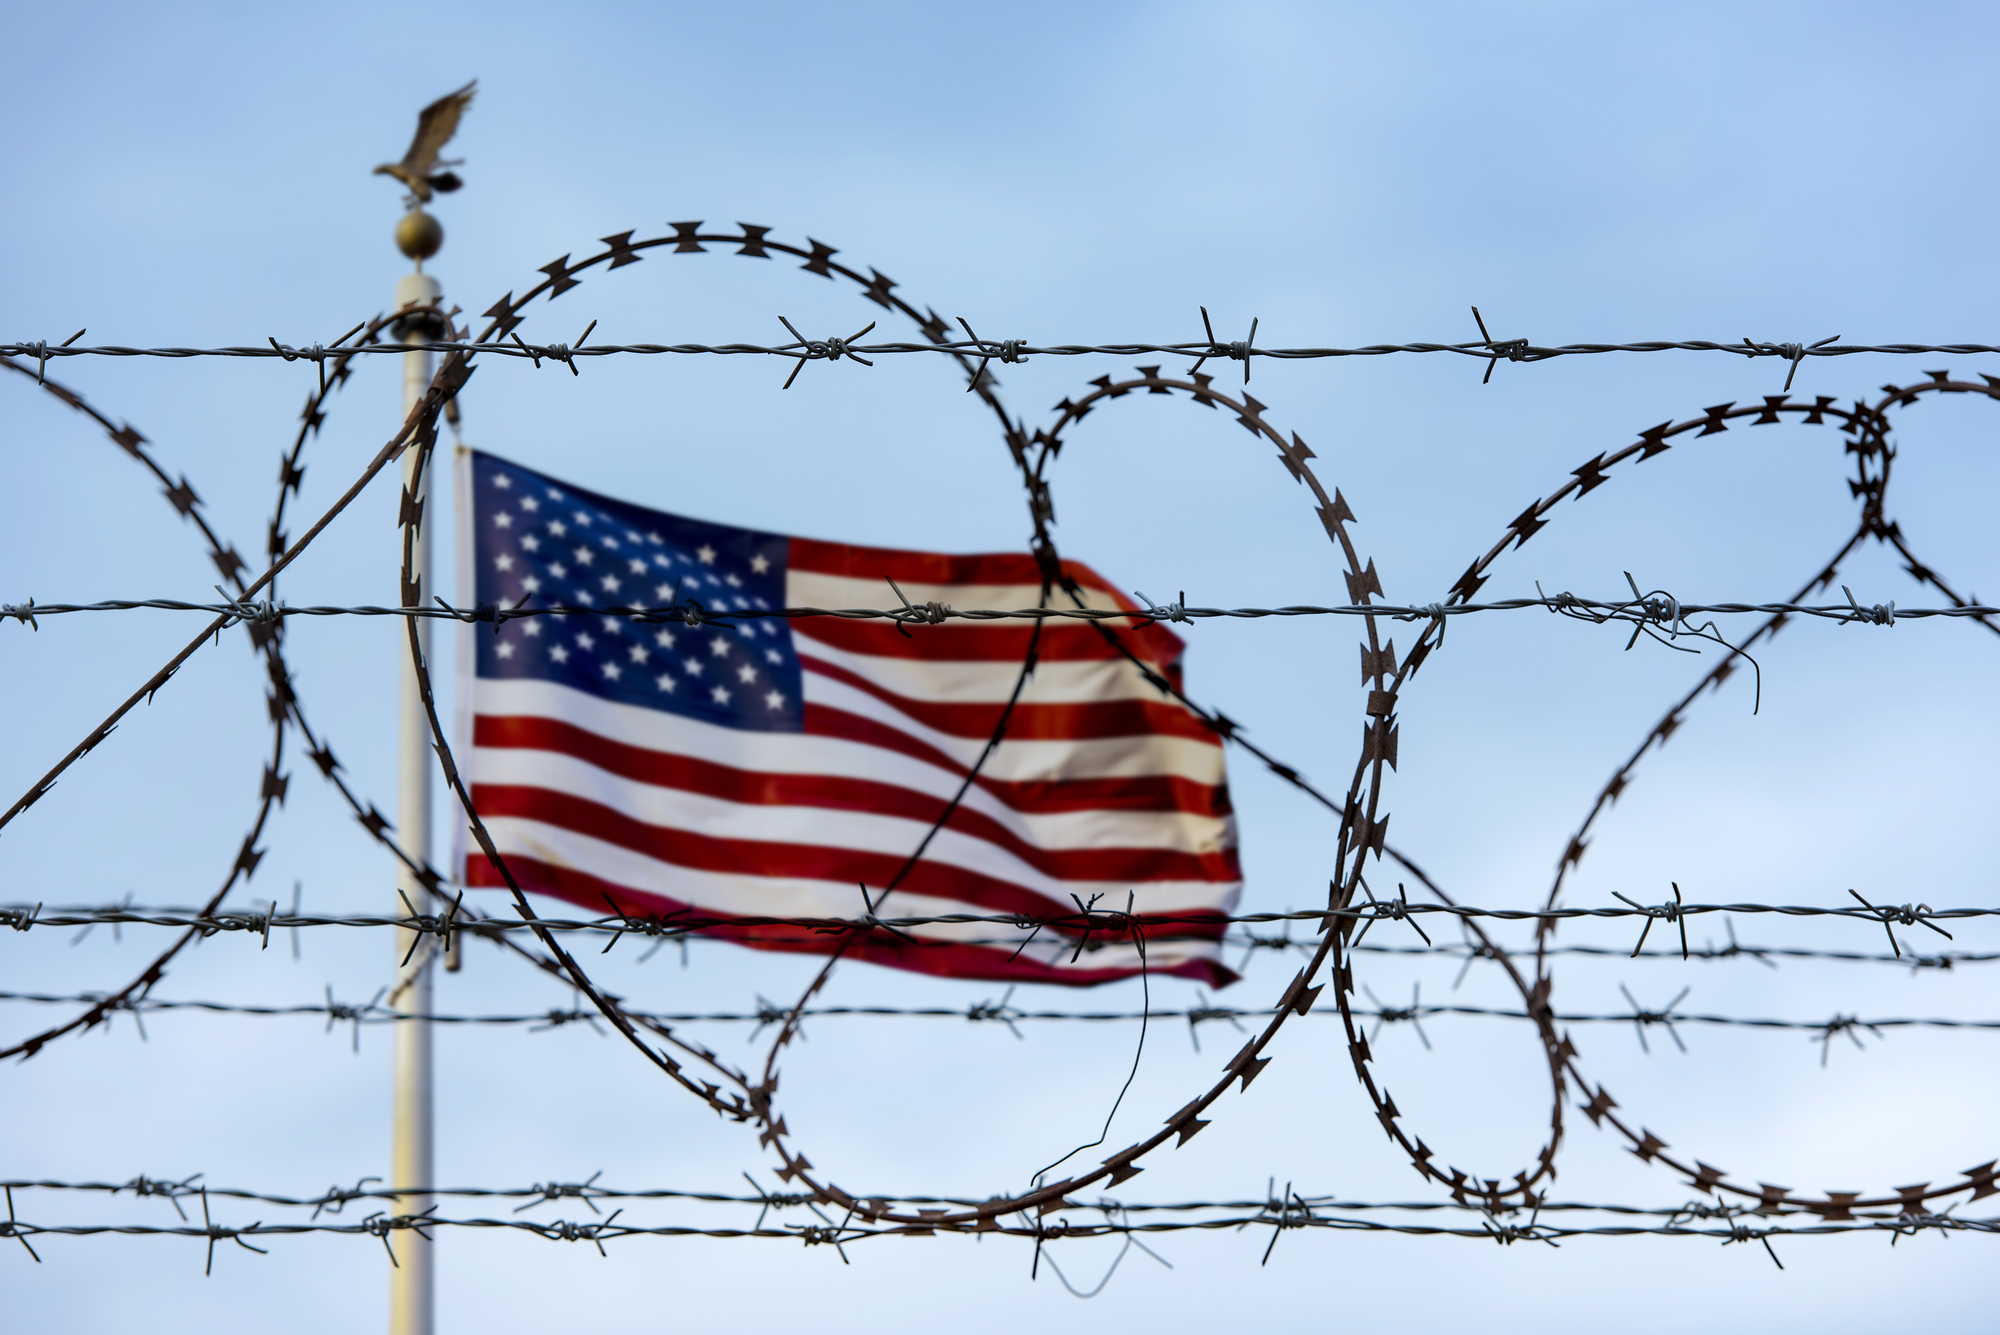 barbed wire in front of a U.S. flag